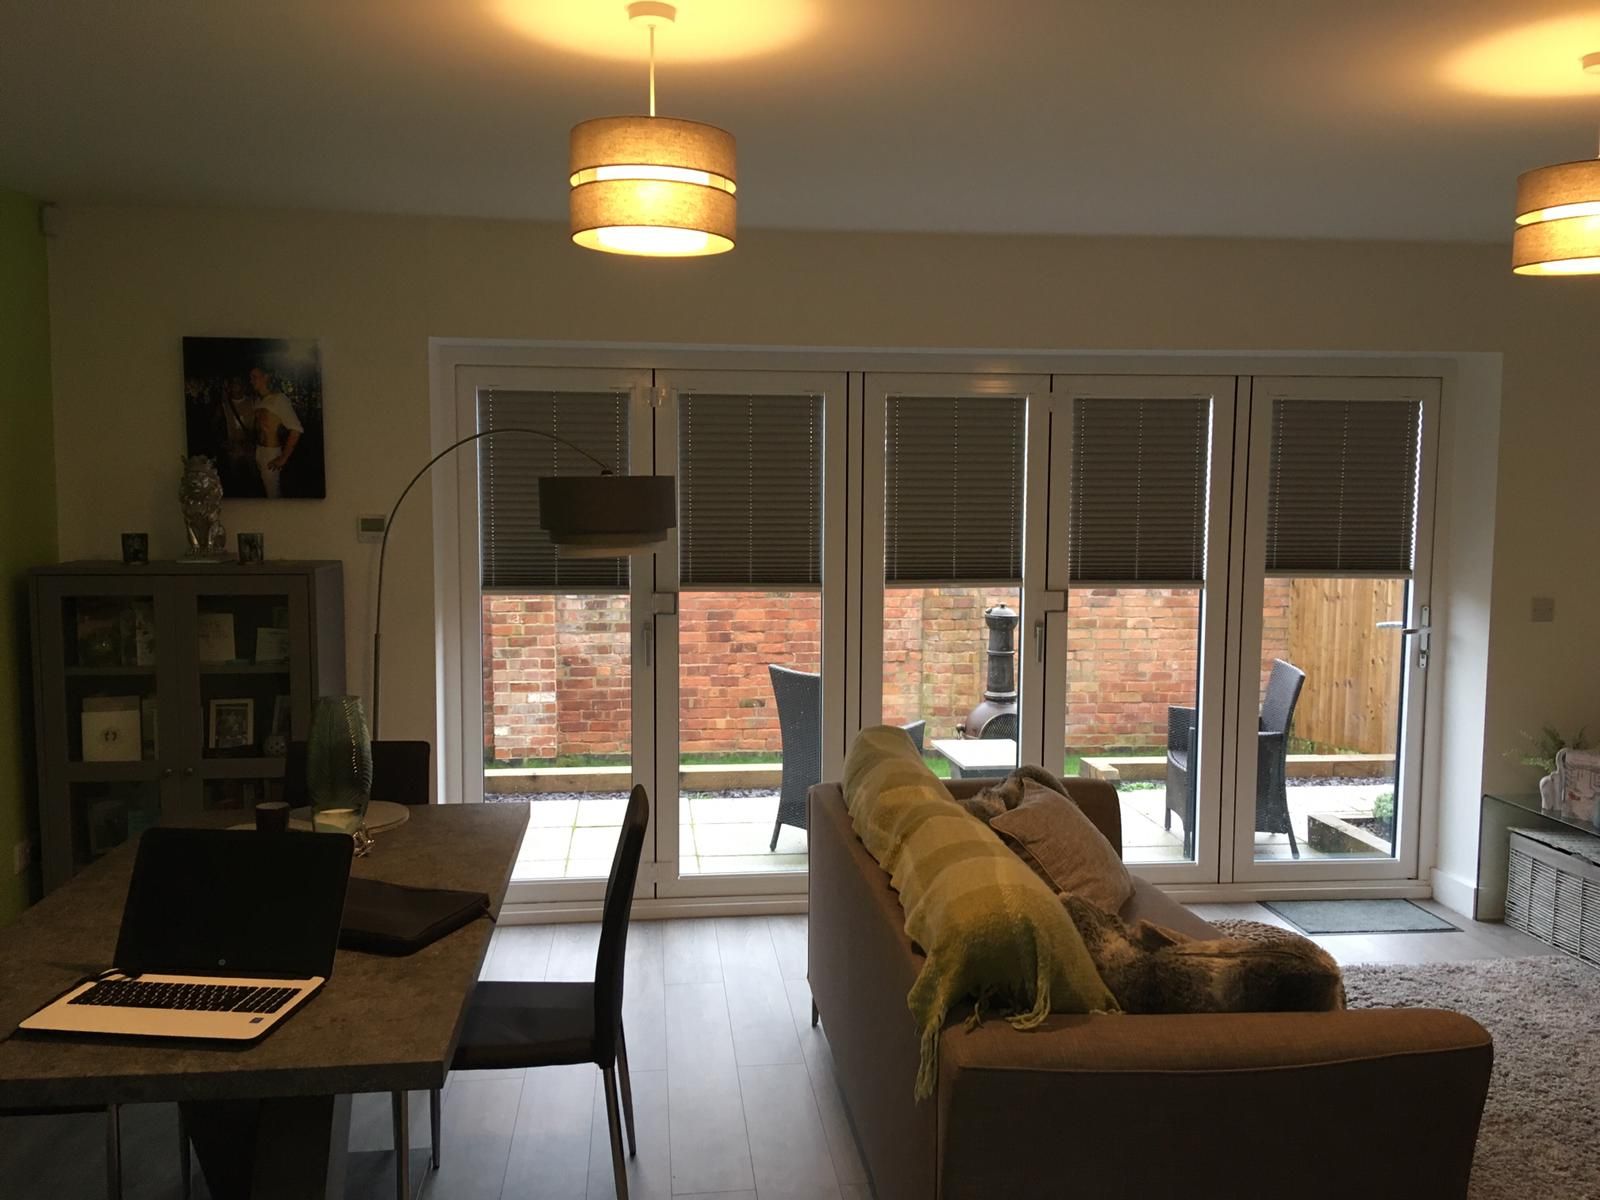 Suppliers of Space-Saving Pleated Blinds UK